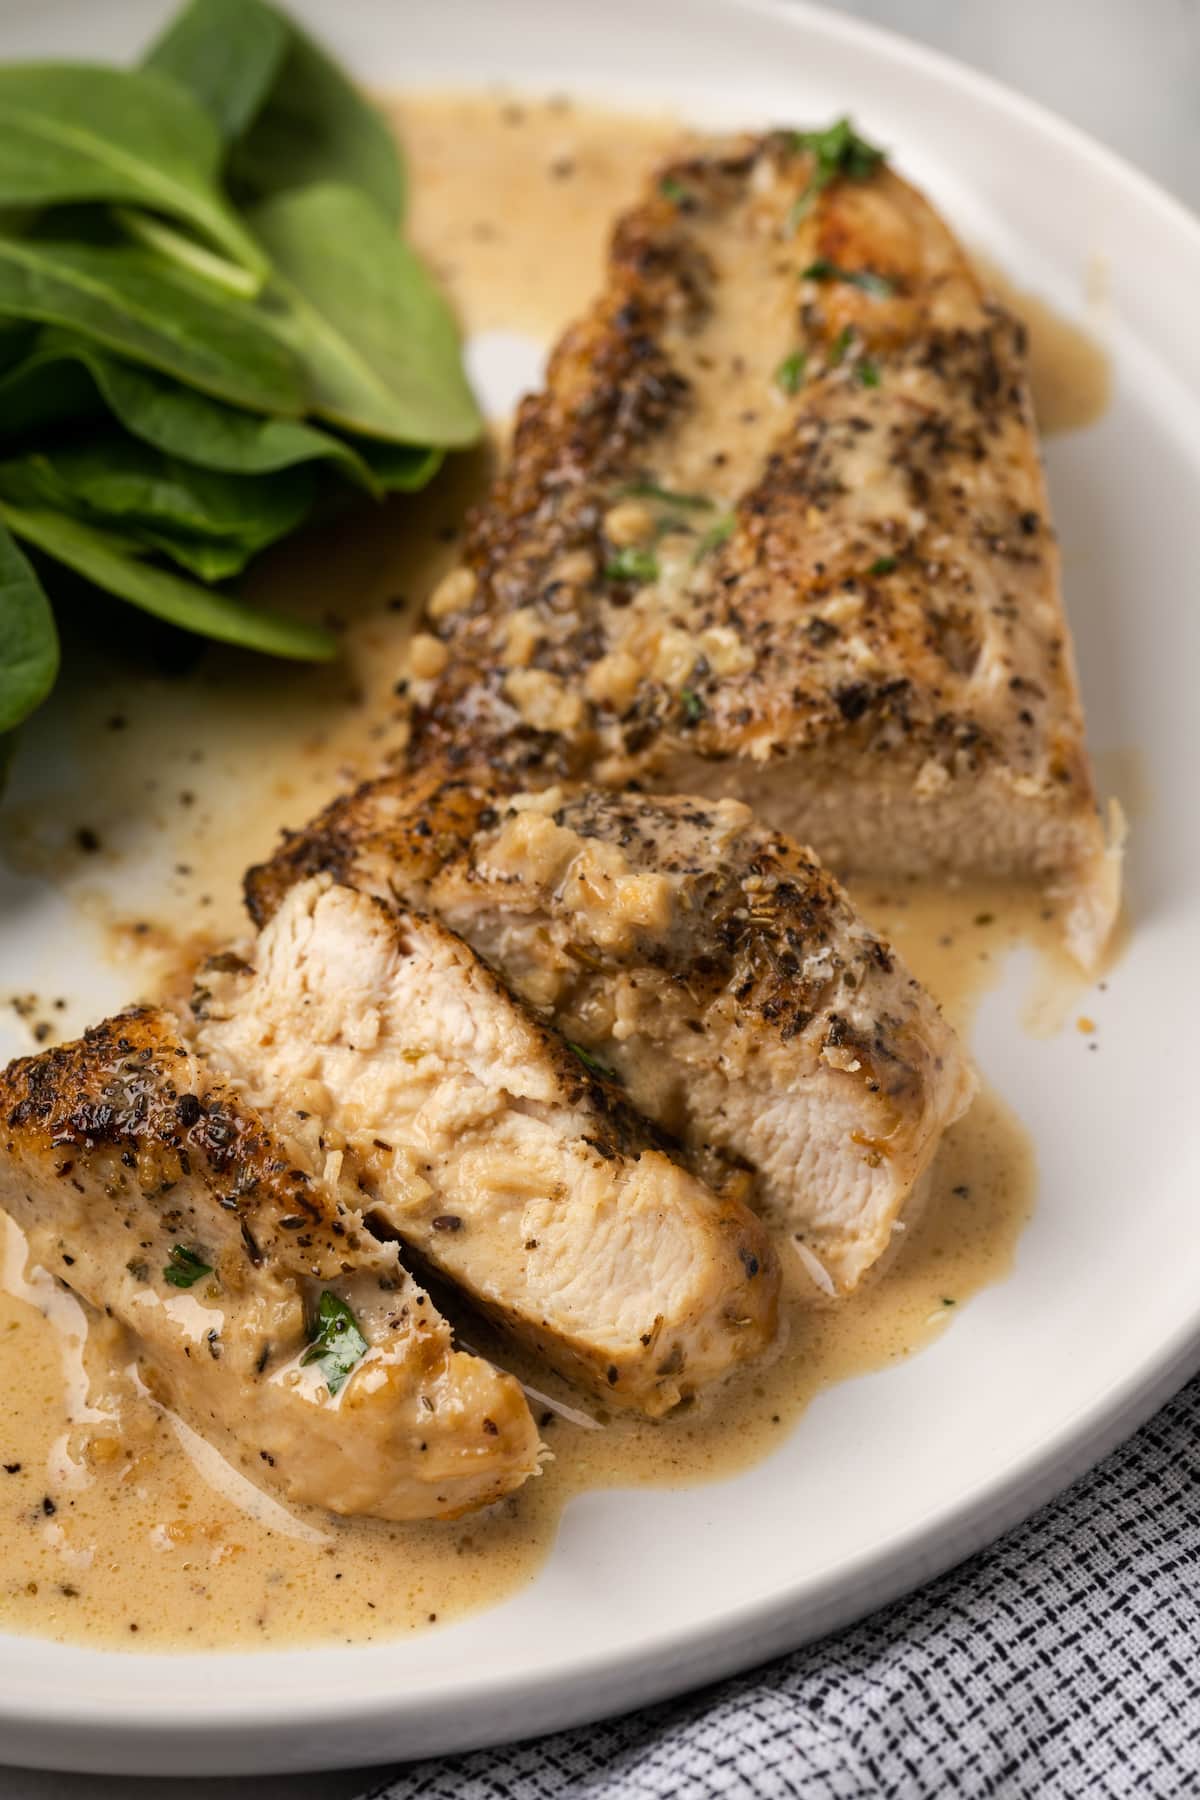 This garlic parmesan chicken recipe is rich, creamy, and loaded with garlic. It’s a decadent keto-friendly dinner that you can make at home in about 20 minutes.